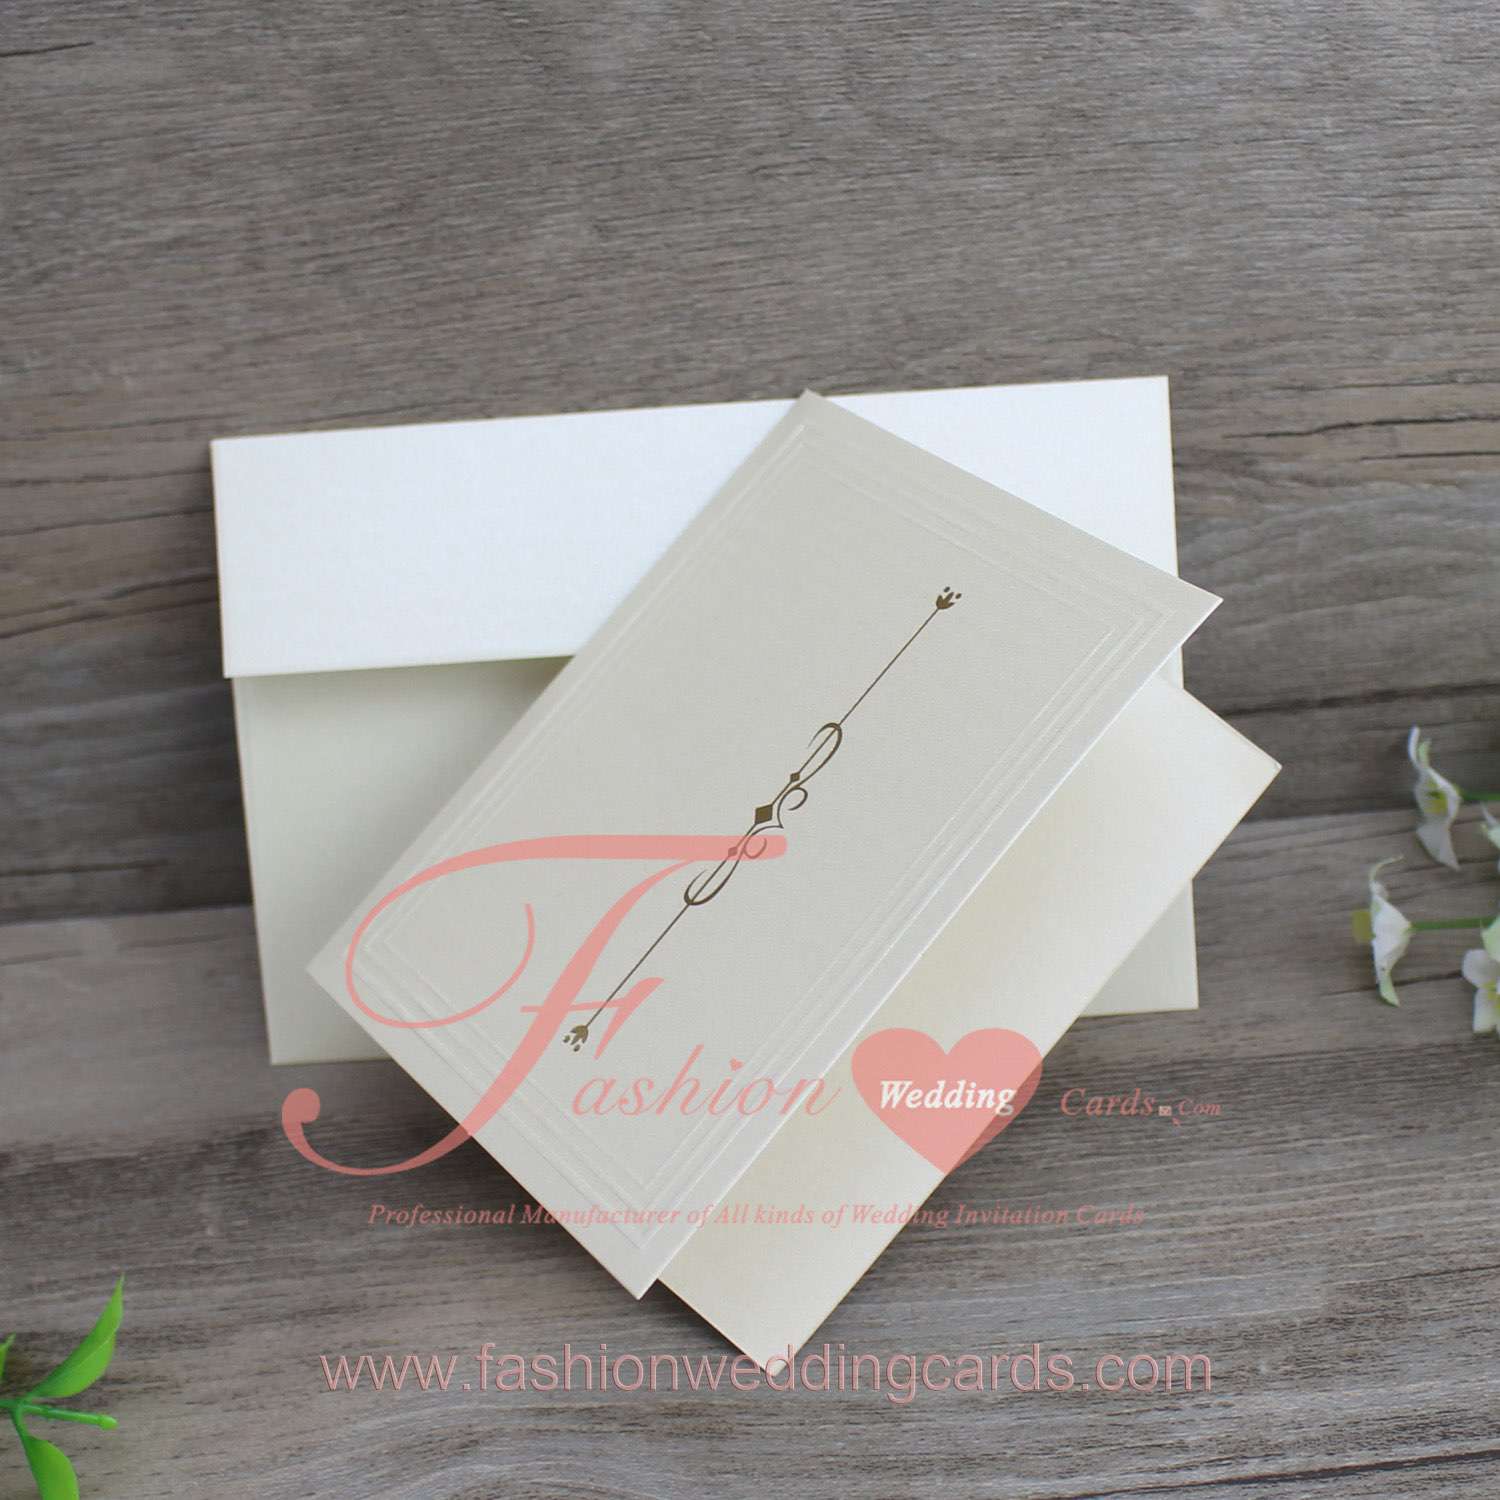 Latest Inexpensive Save the Date Wedding Invitations